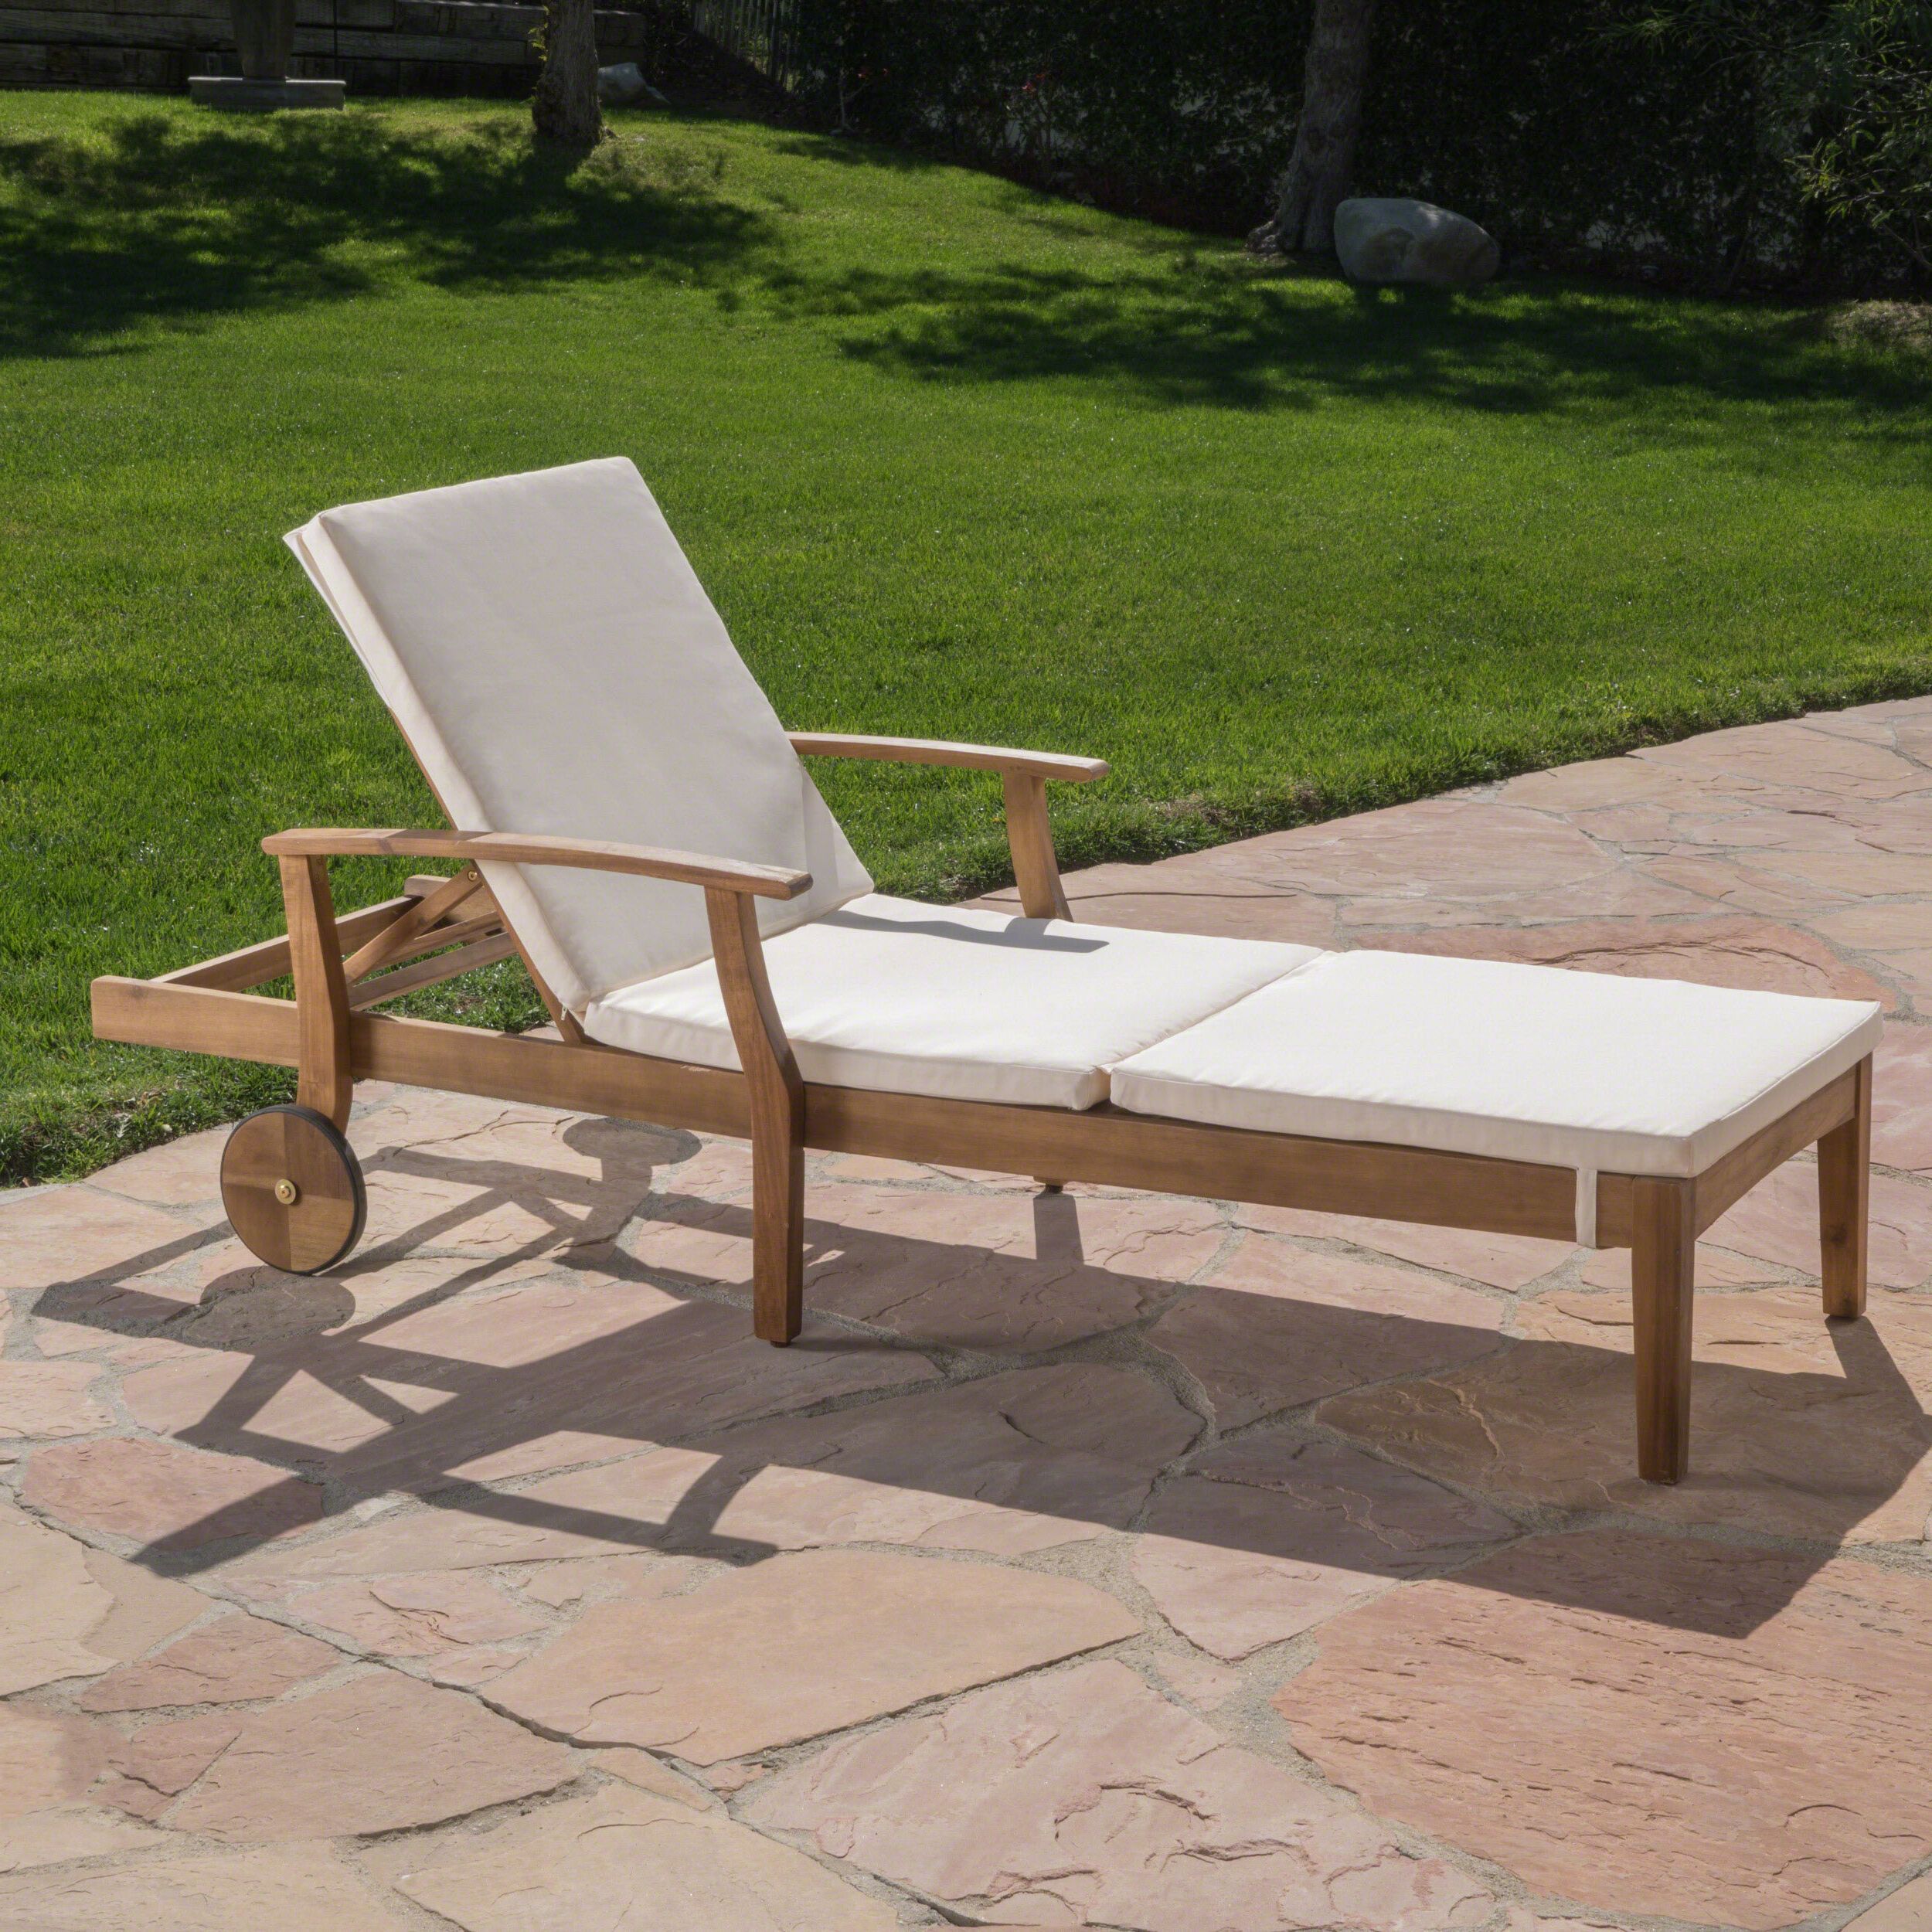 Antonia Reclining Chaise Lounge With Cushion Inside Well Known Outdoor 3 Piece Acacia Wood Chaise Lounge Sets (View 17 of 25)